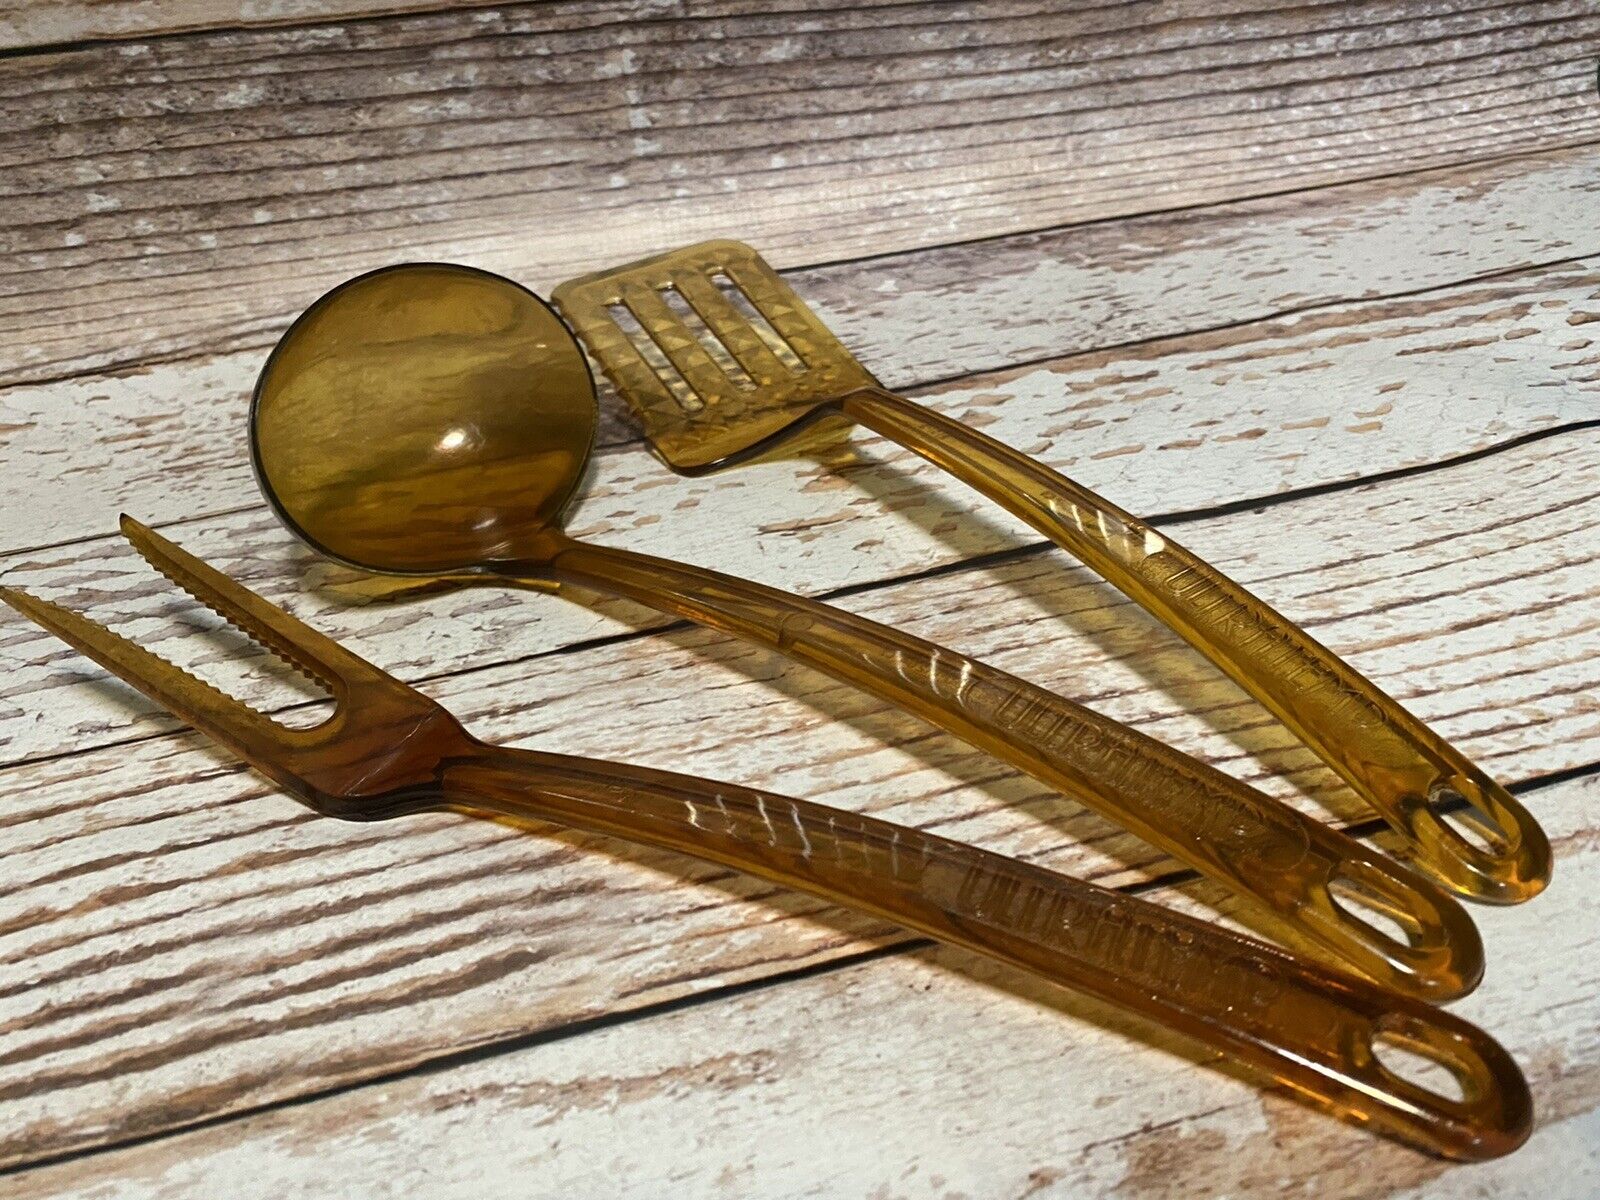 Lot of 3 Vintage Ultratemp Amber Visions Utensils By Robinson Knife Co Made USA